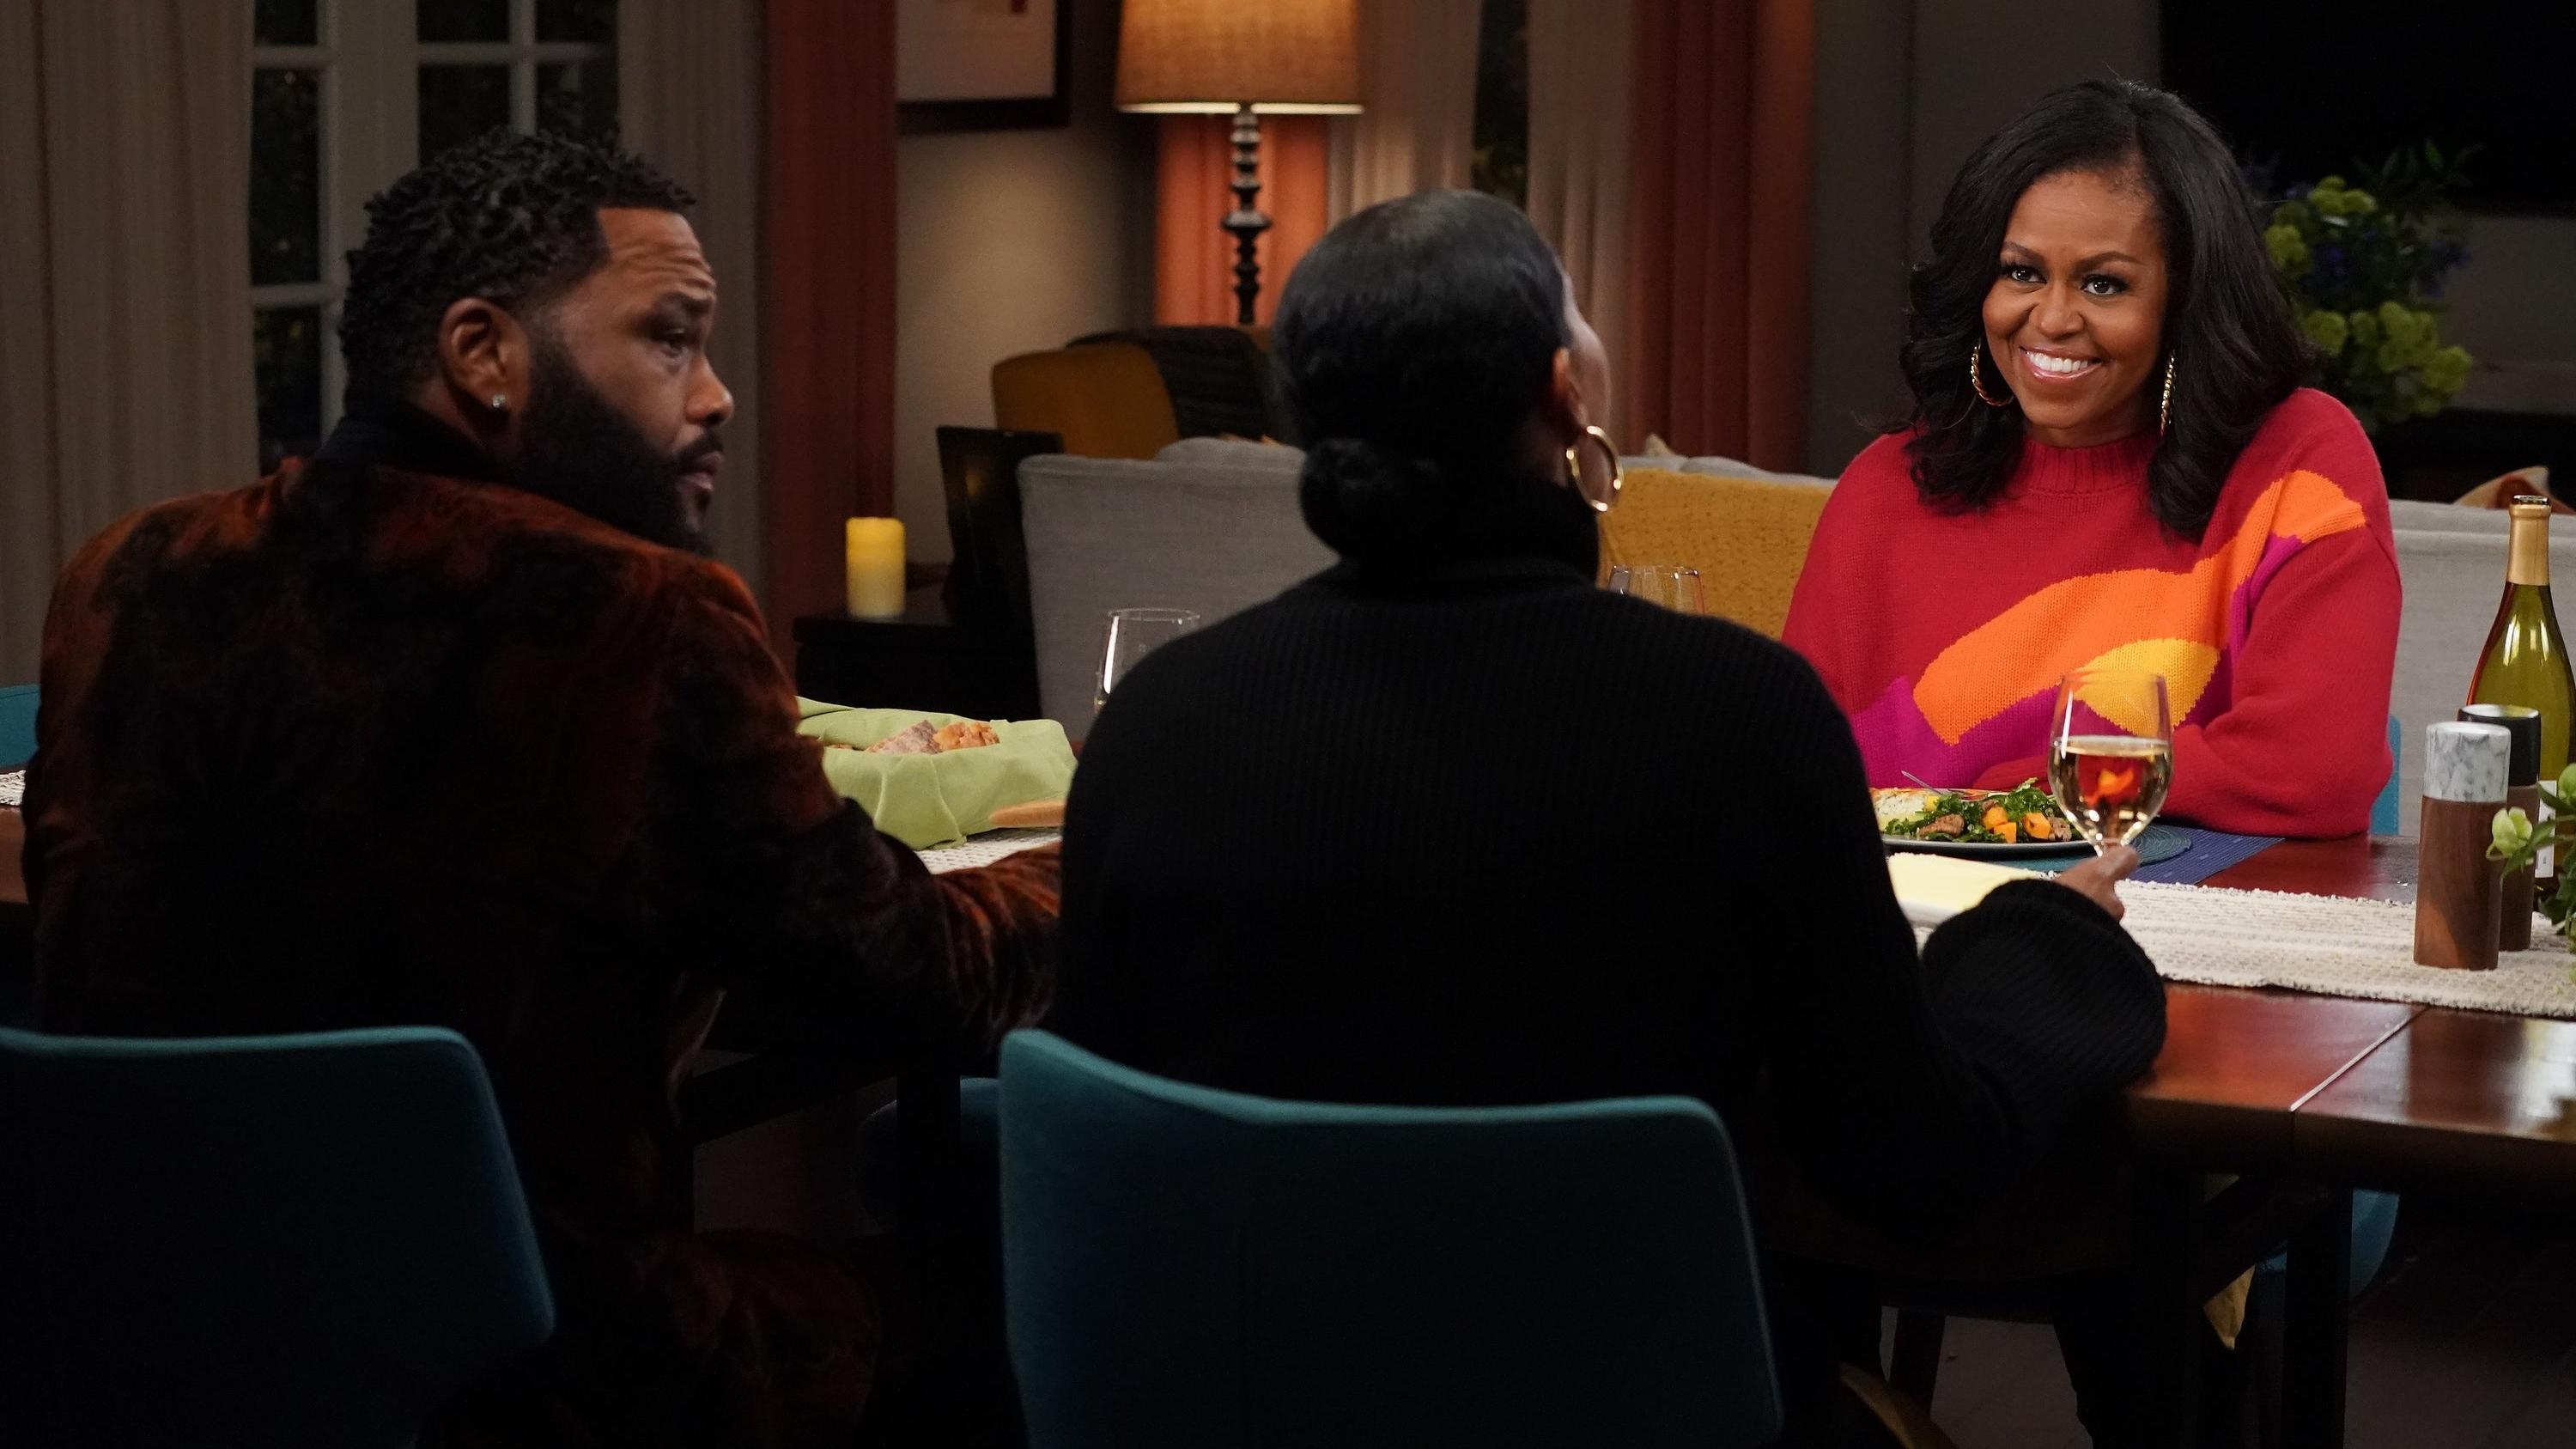 Michelle Obama made a guest appearance on Black-ish